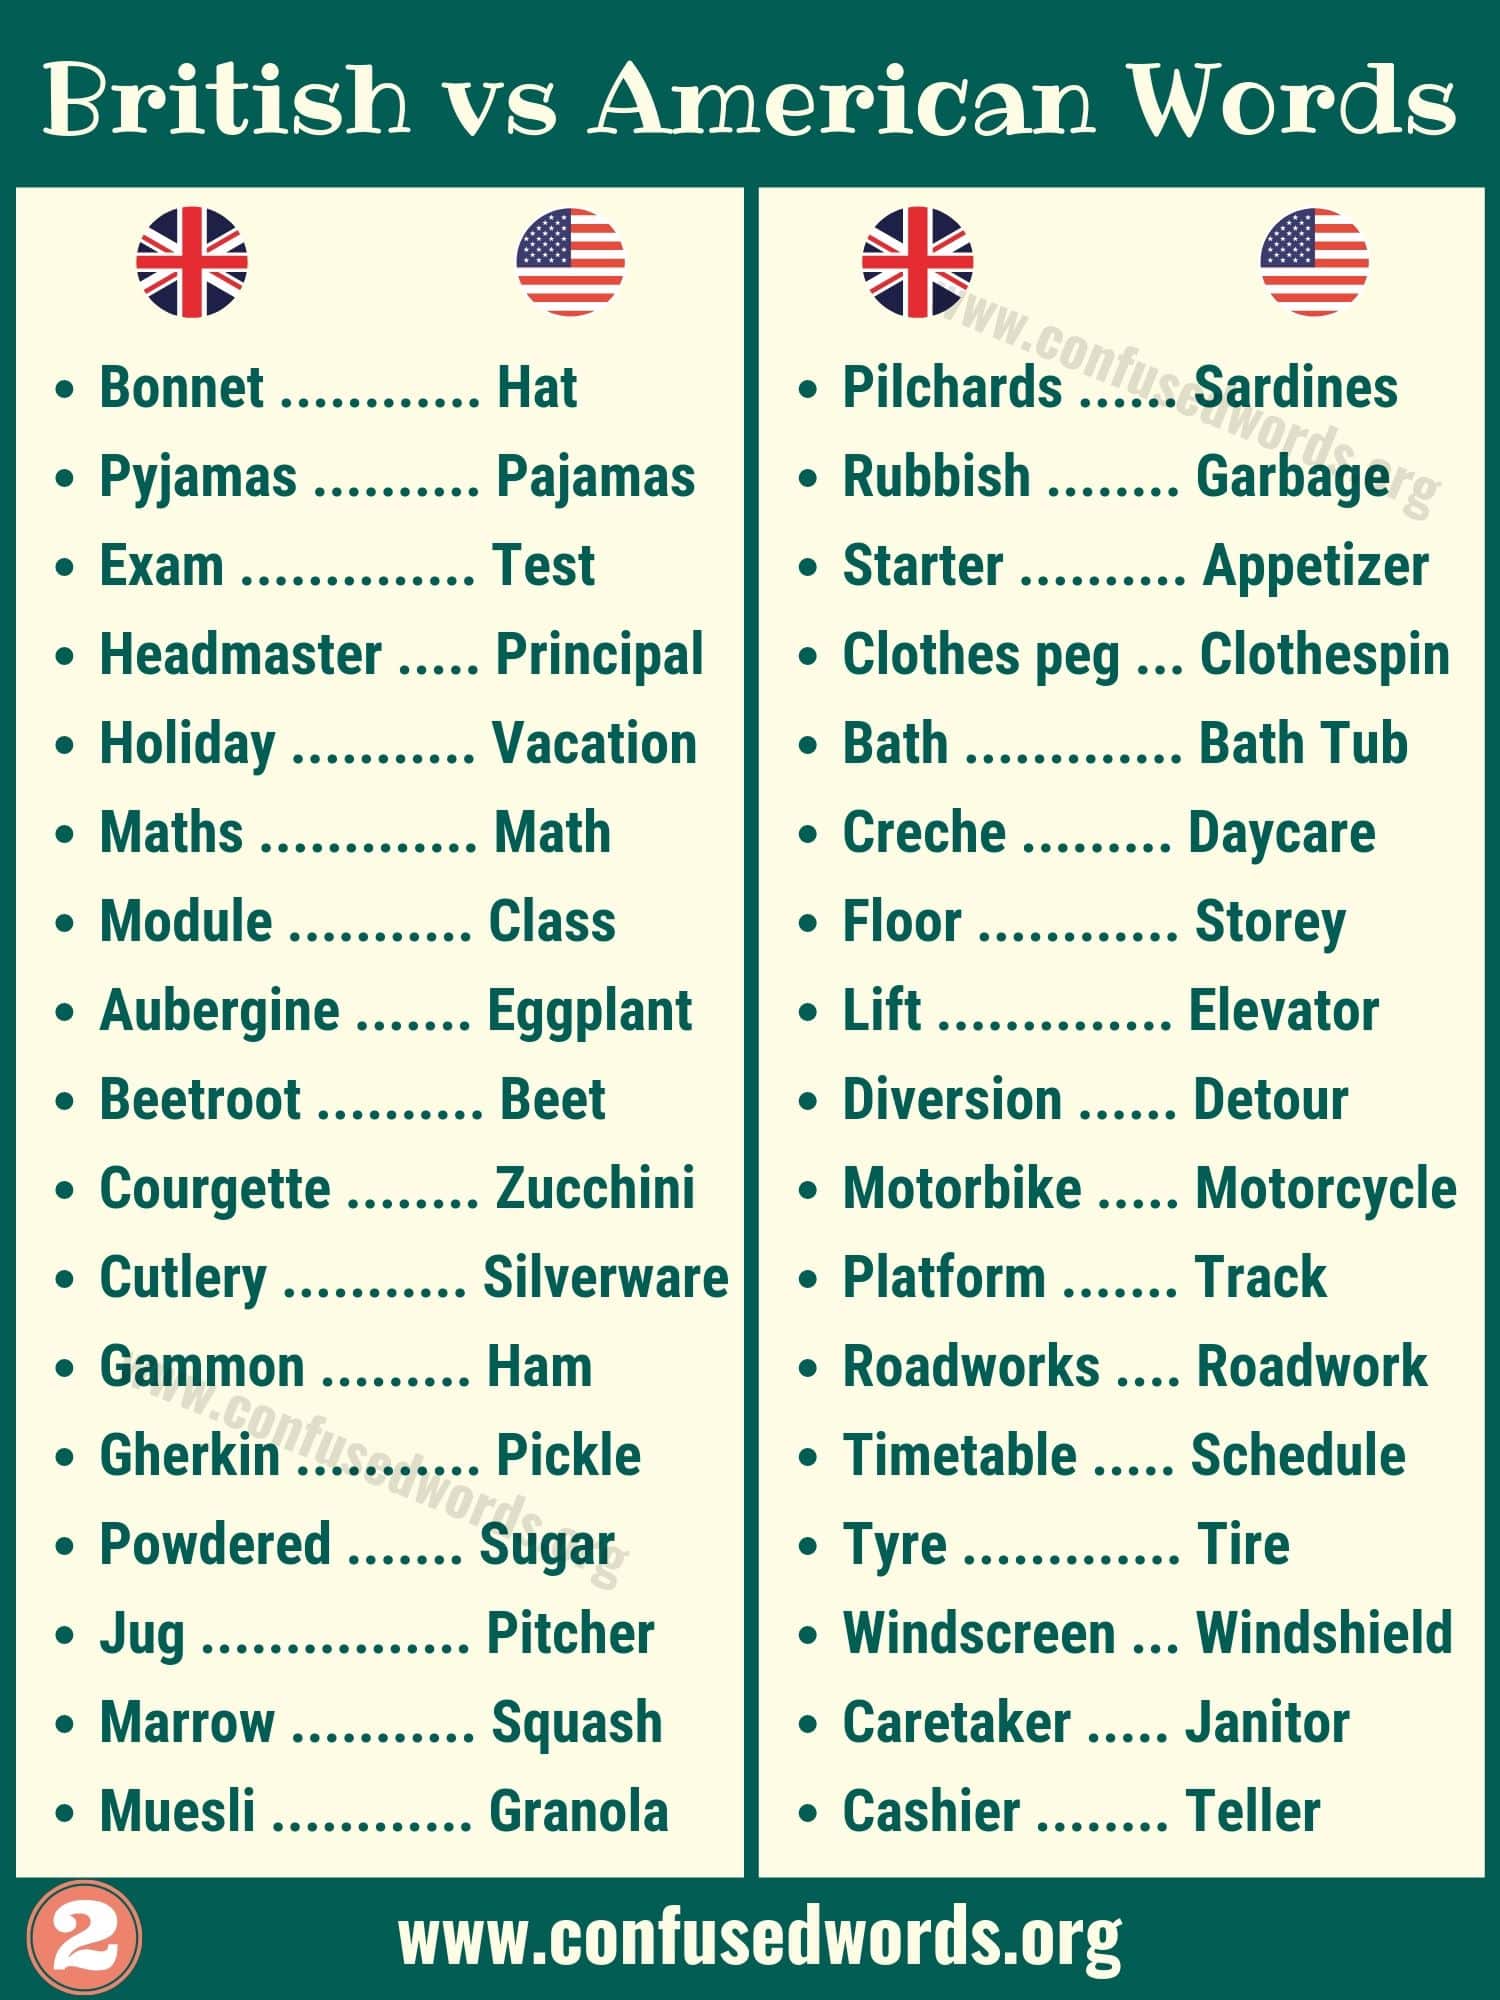 British vs American Words Differences